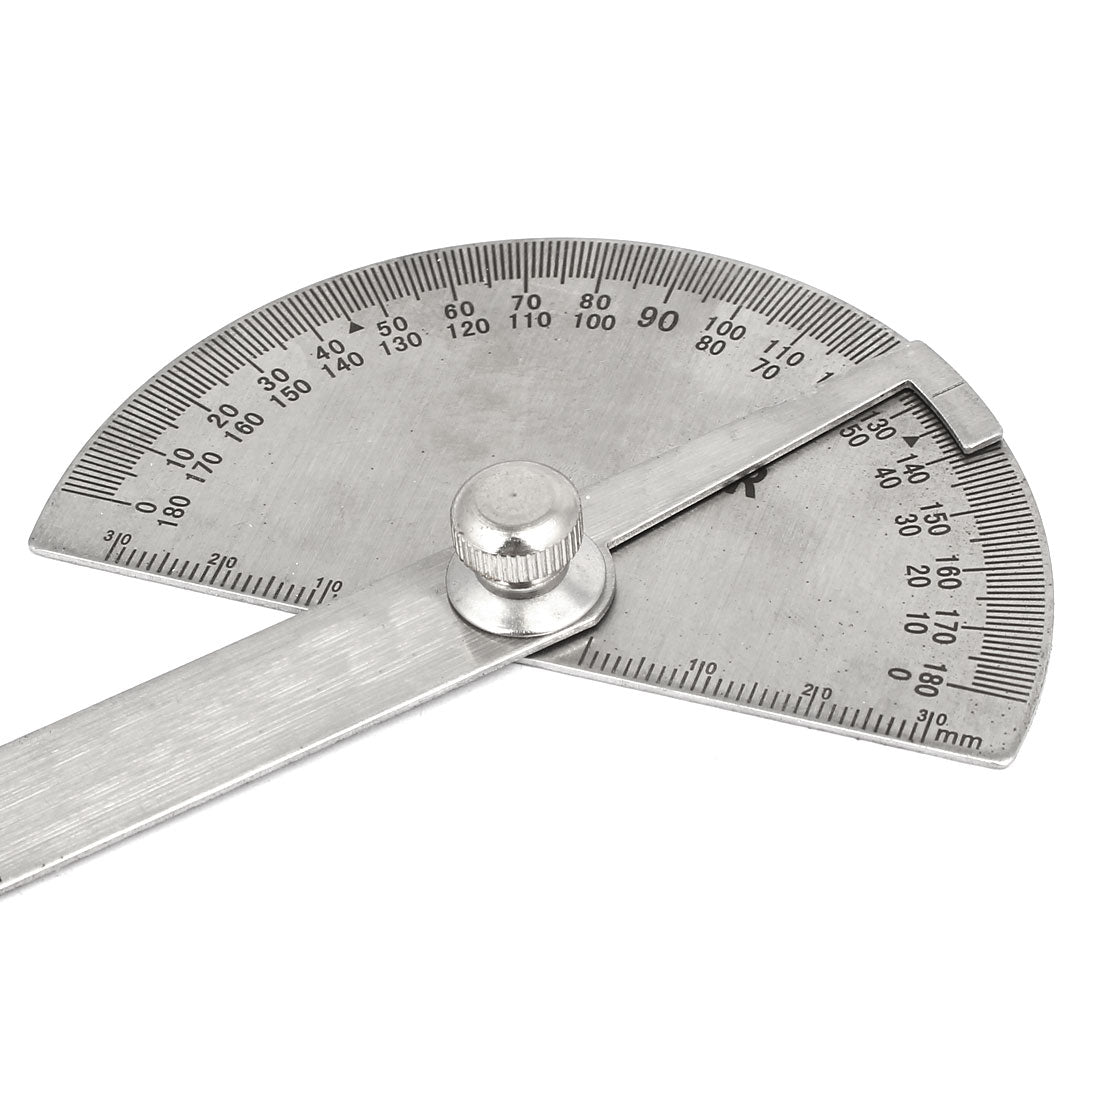 uxcell Uxcell Metal Round Head 180 Degree Rotary Protractor Angle Ruler 195mm Long Silver Tone